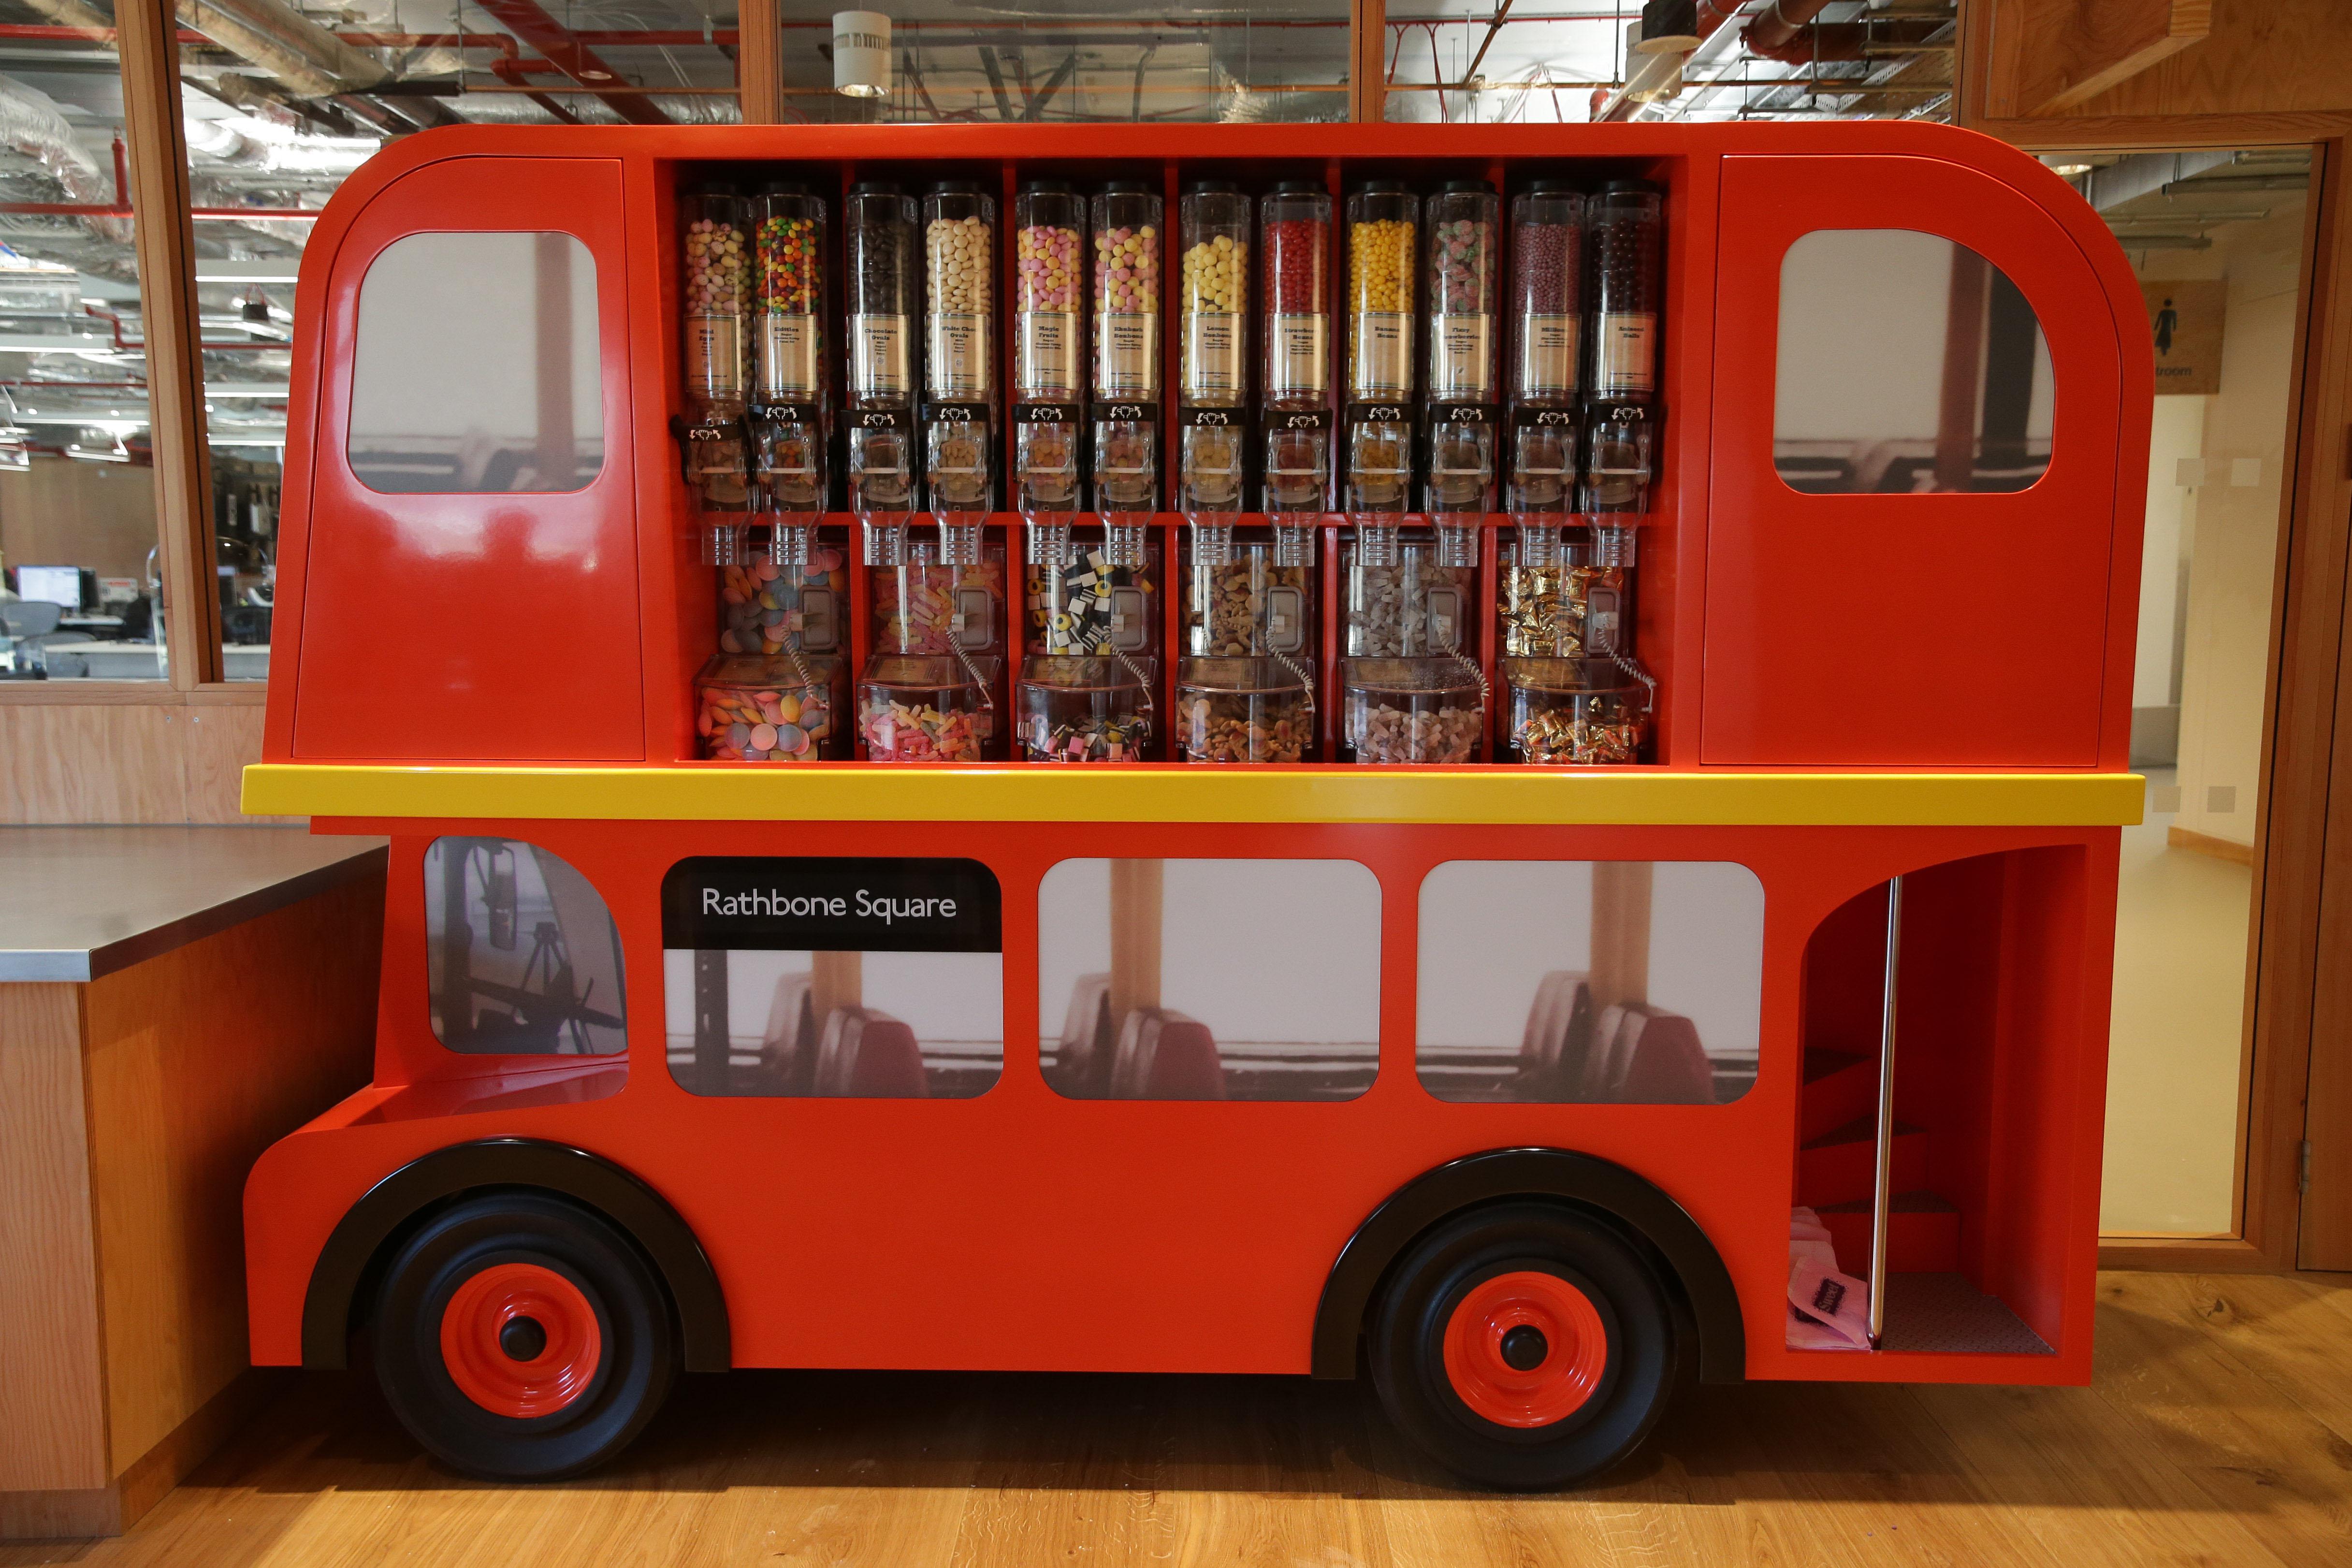 A candy dispenser decorated as a double-decker London bus is displayed at Facebook's new headquarters, designed by Canadian-born American architect Frank Gehry, at Rathbone Place in central London on December 4, 2017.
Social media titan Facebook opened a new office in London on December 4, 2017, that is set to be its biggest engineering hub outside America, the company has announced. / AFP PHOTO / Daniel LEAL-OLIVAS        (Photo credit should read DANIEL LEAL-OLIVAS/AFP/Getty Images)